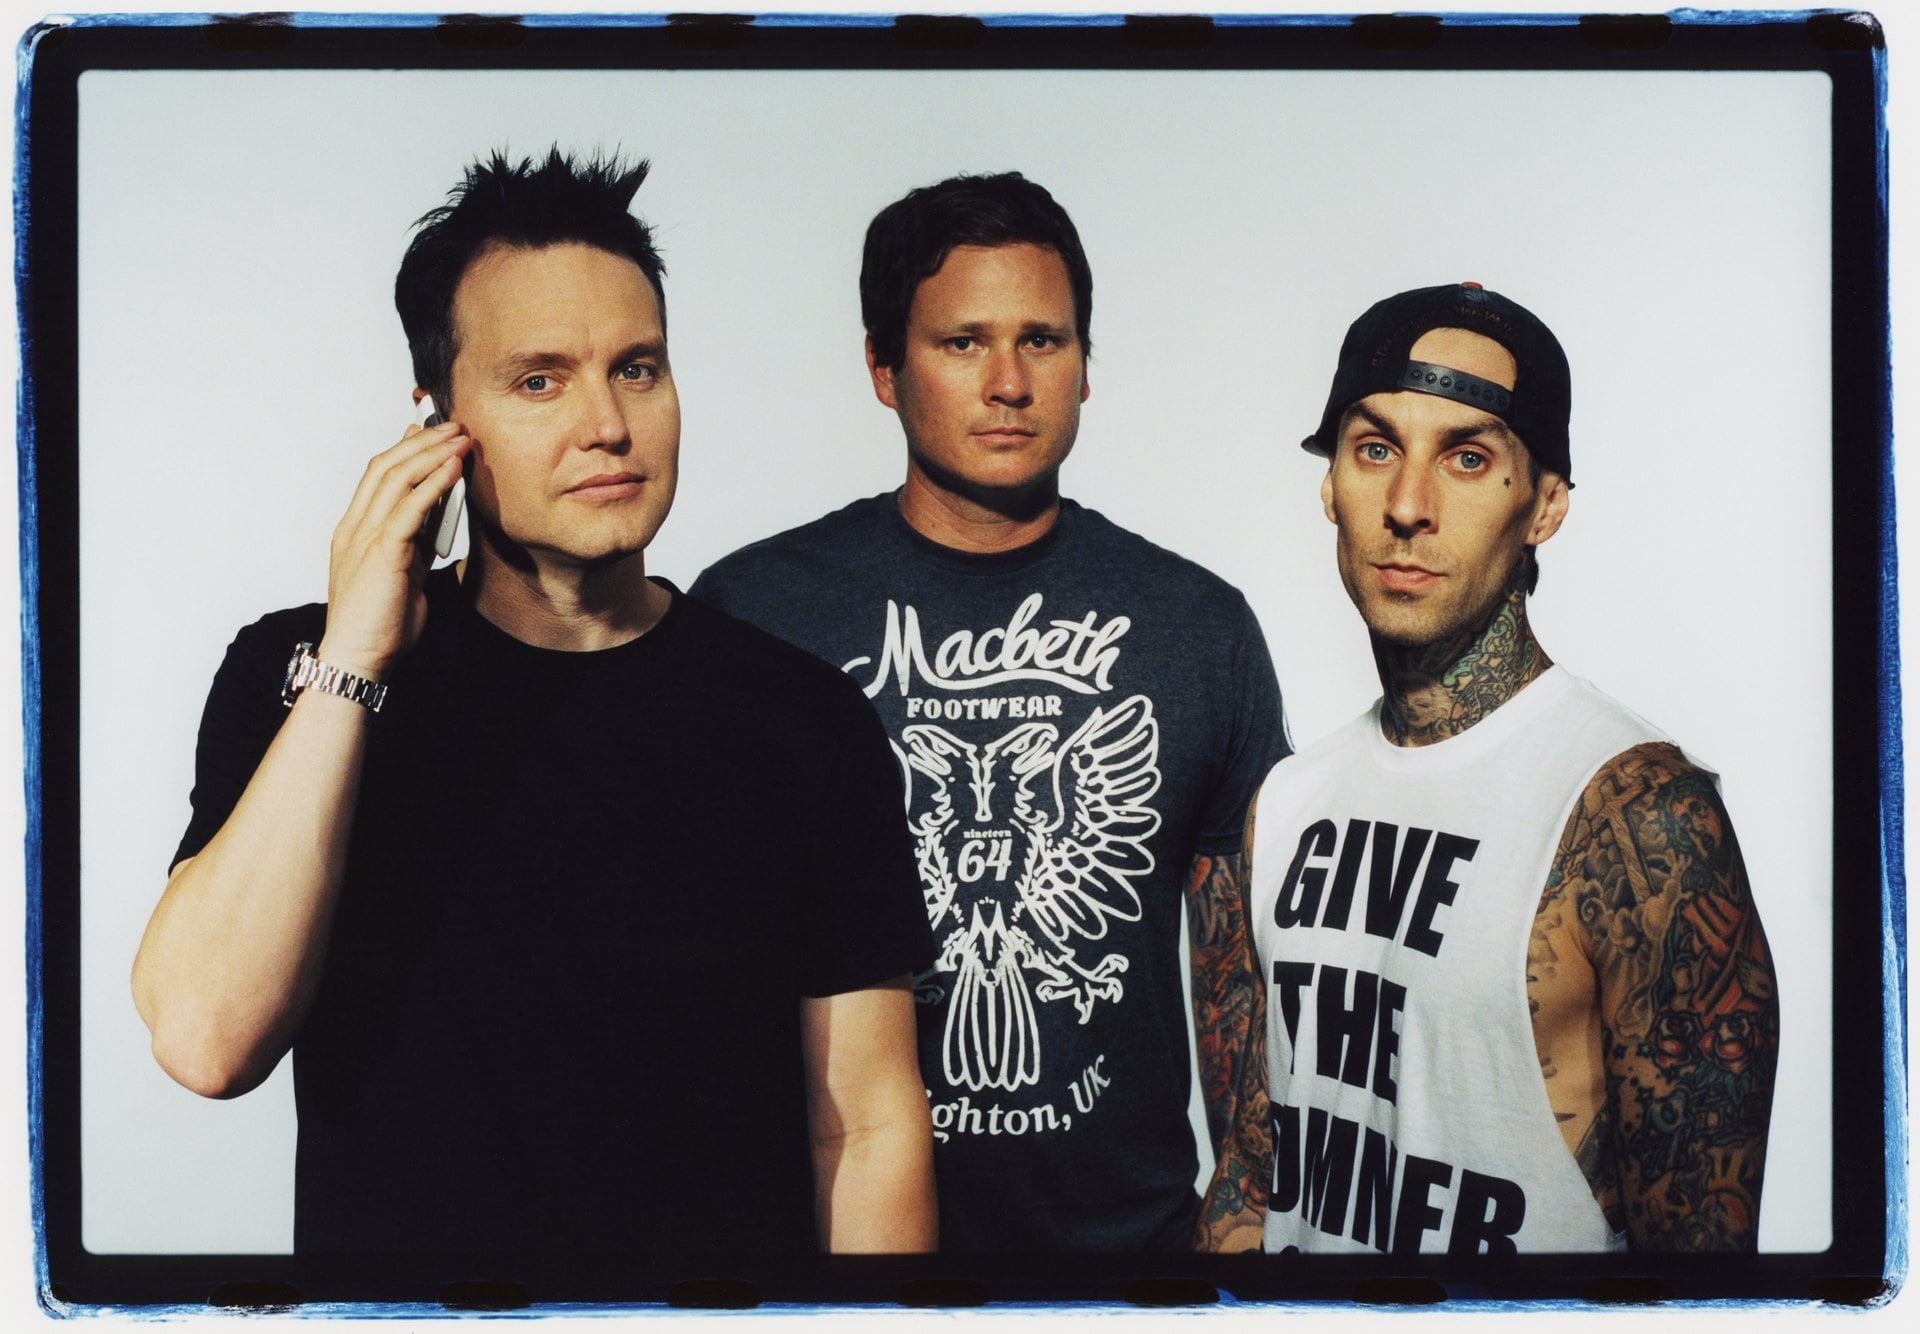 LOS ANGELES - 2011:  Band Blink 182 poses for a publicity photo shoot at the Sound Matrix Studio for their album, Neighbourhoods in Orange County, California 2011. Mark Hoppus, Tom DeLonge, Travis Barker(Photo by Estevan Oriol/Getty Images)